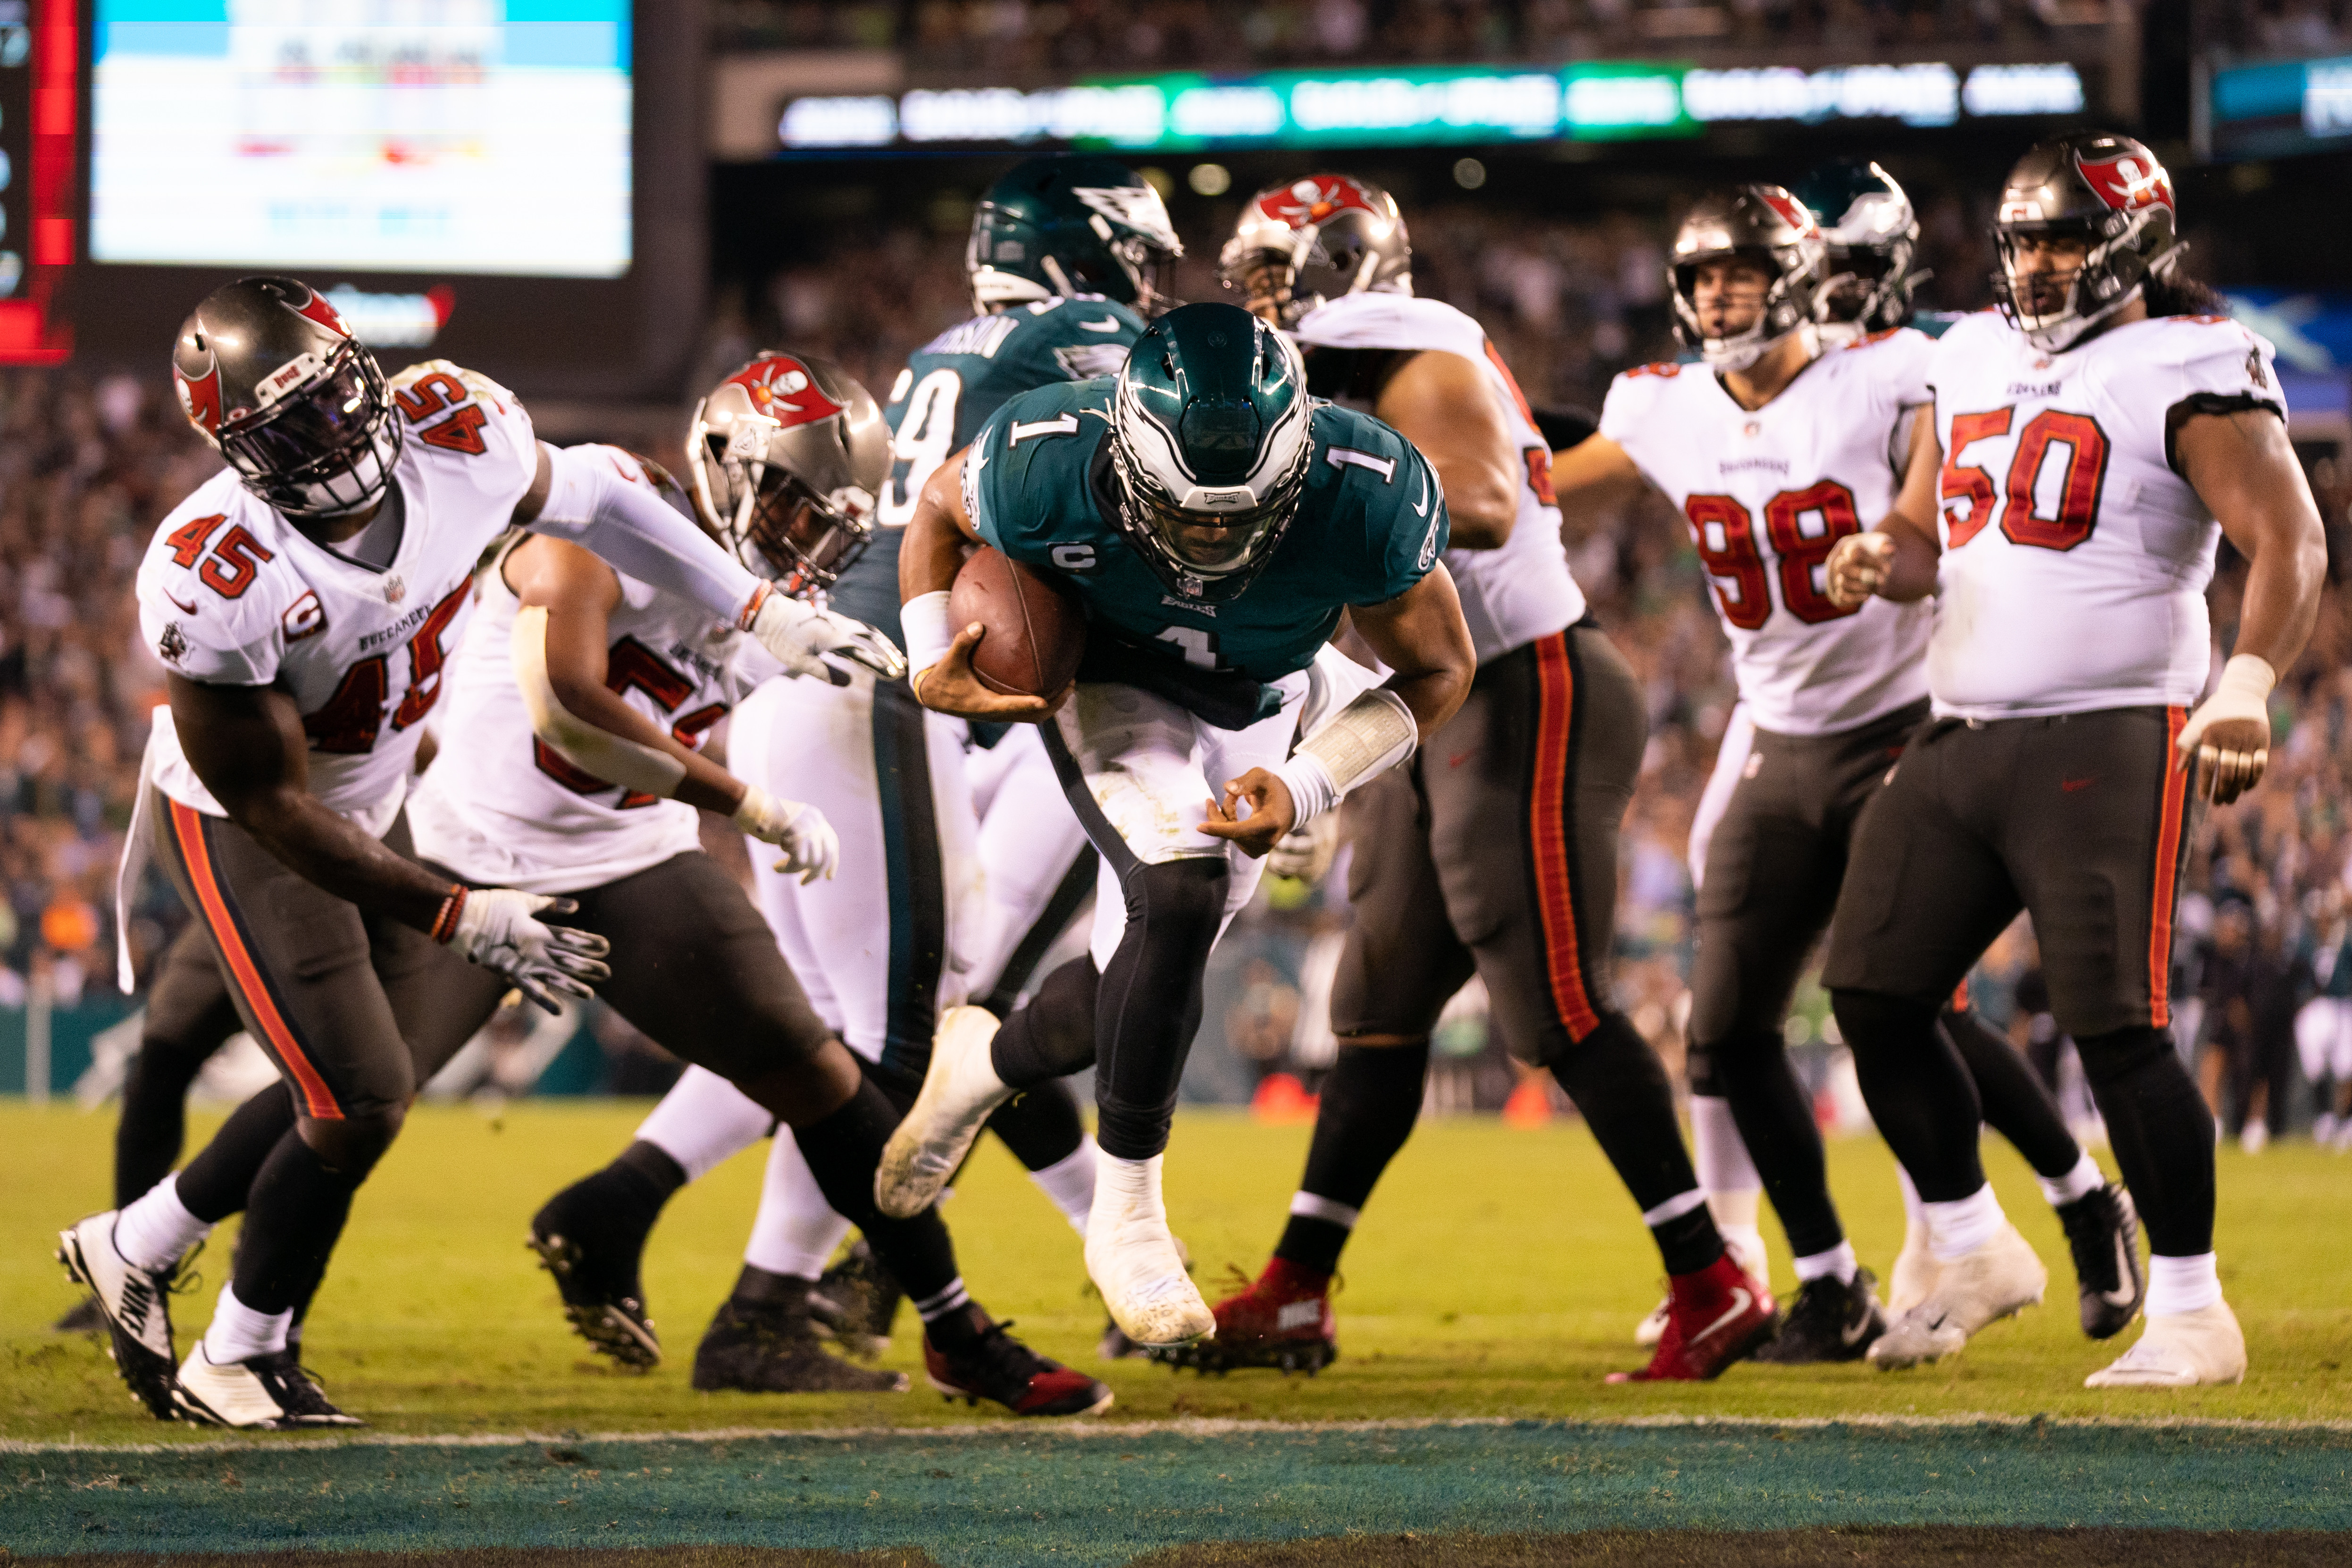 Philadelphia Eagles quarterback Jalen Hurts (1) runs for a touchdown against the Tampa Bay Buccaneers during the fourth quarter at Lincoln Financial Field.